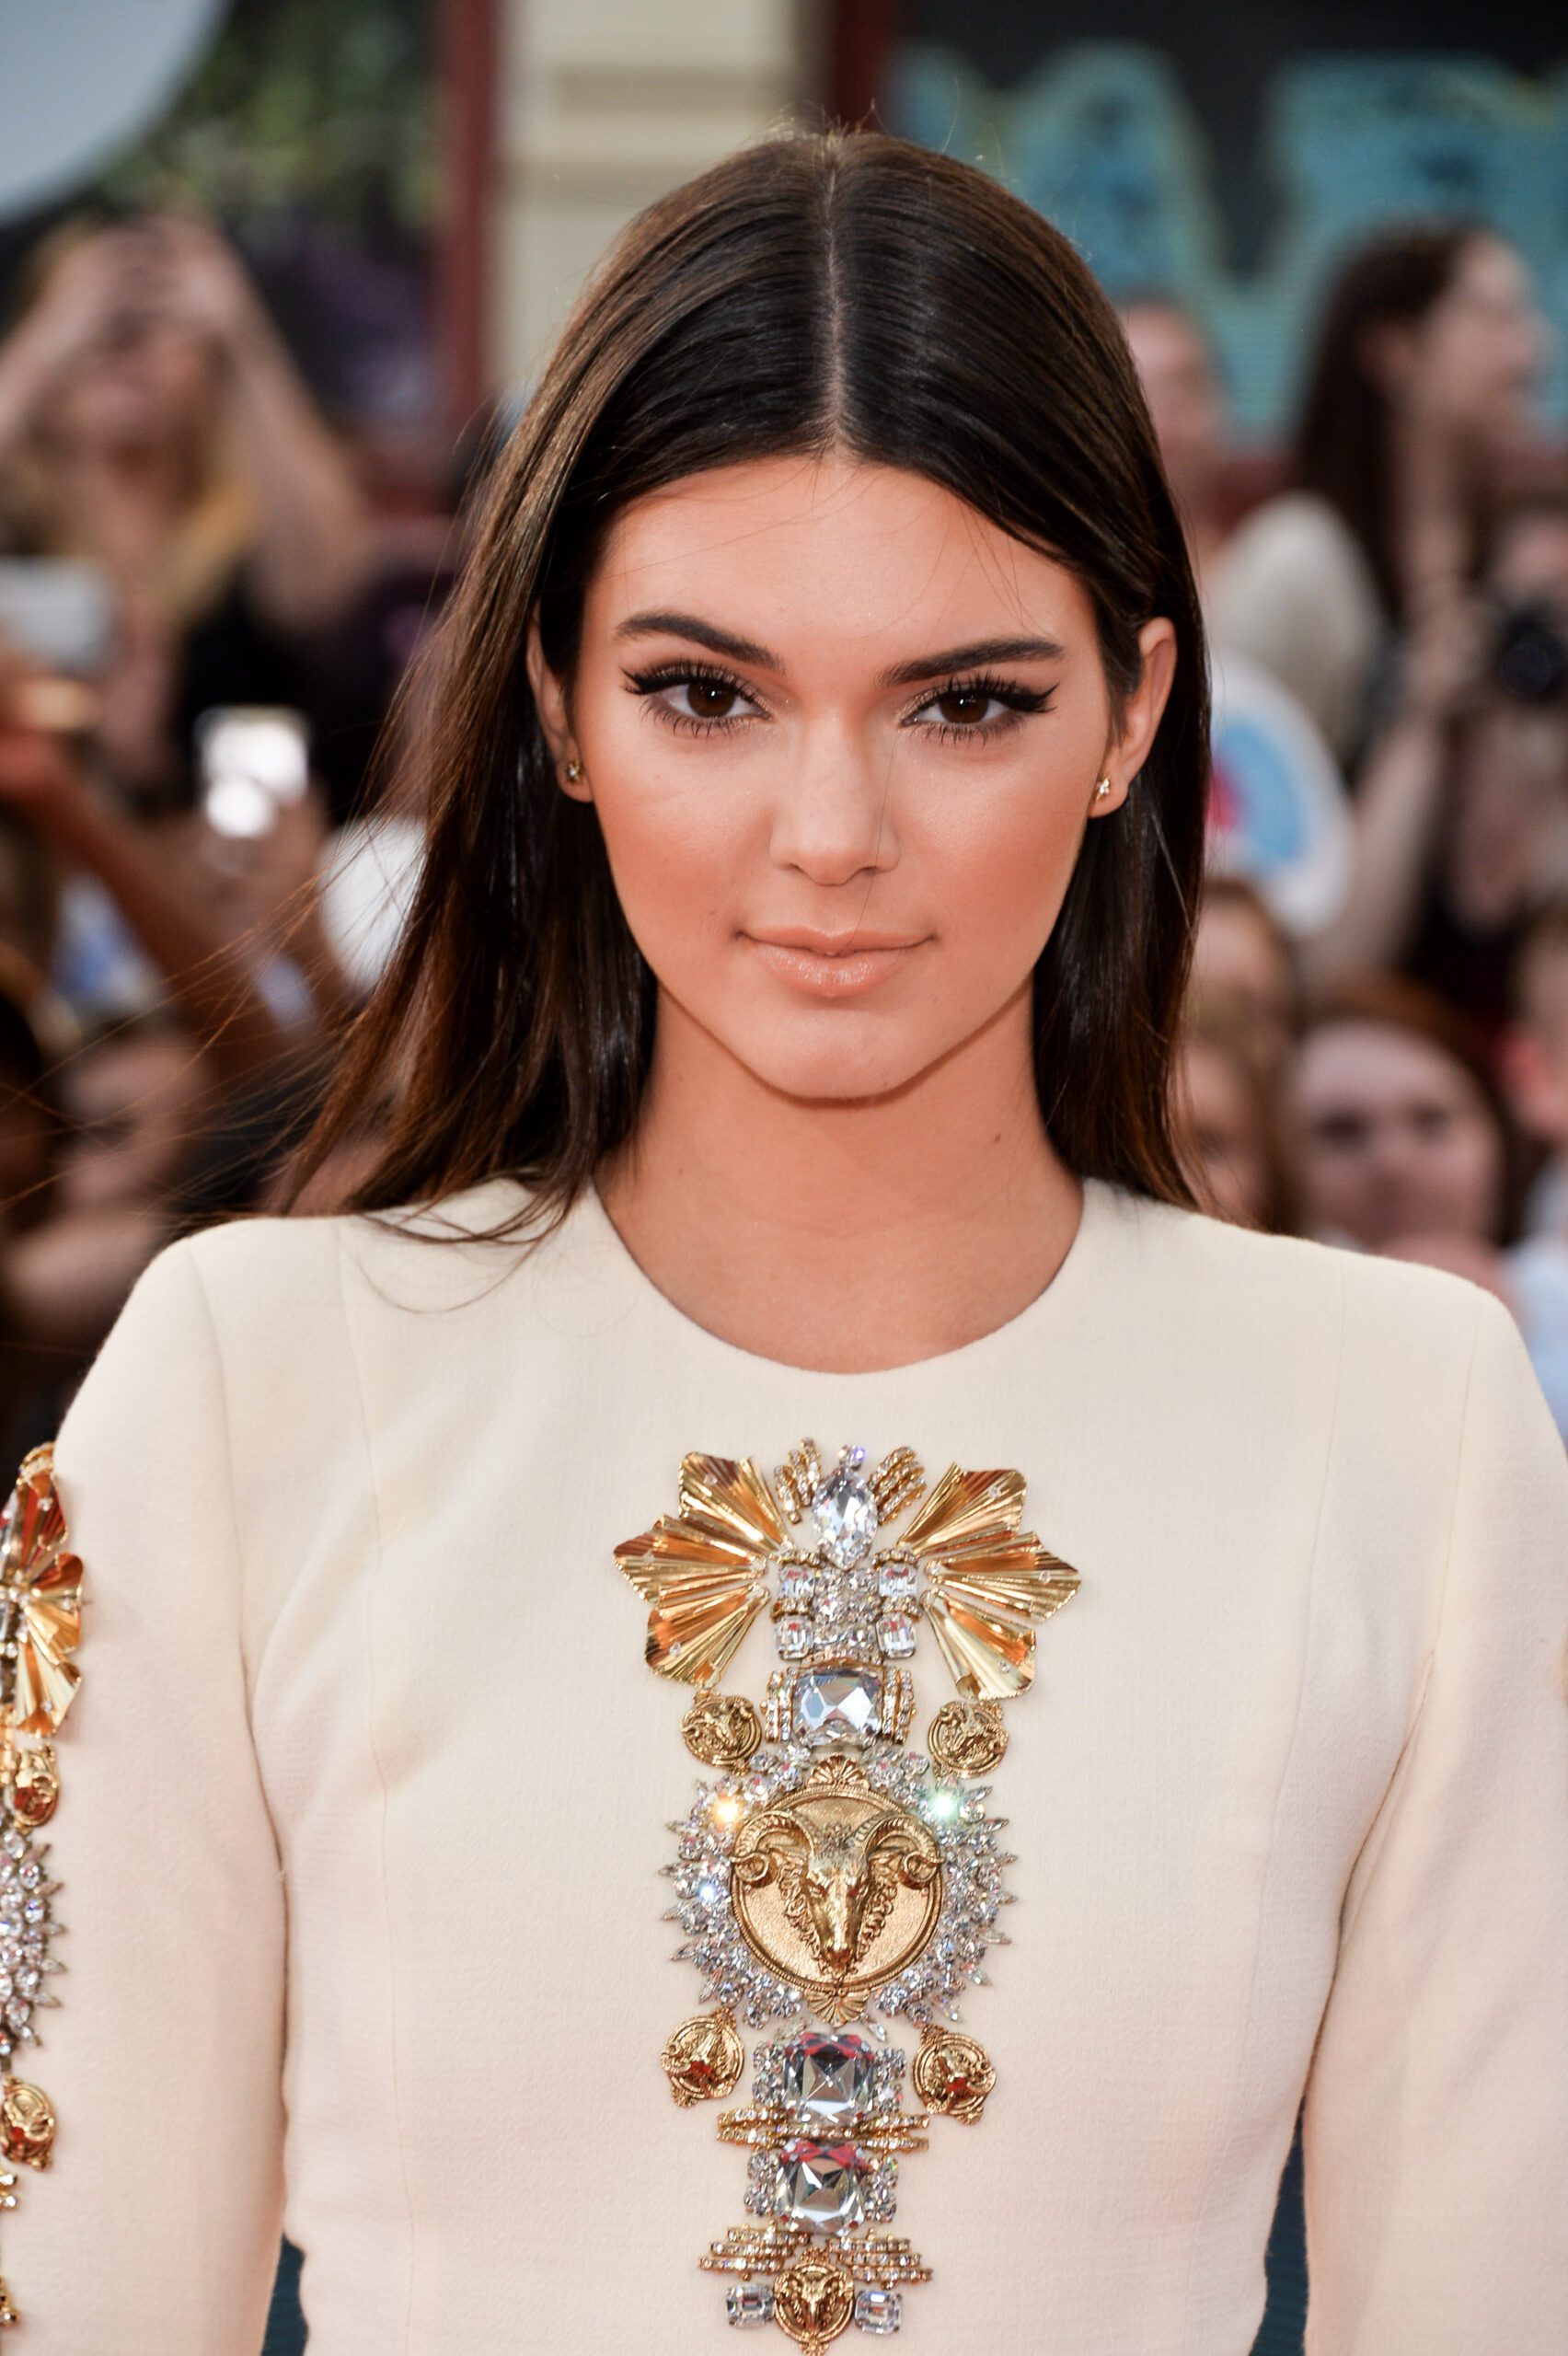 Kendall Jenner at the 2014 MuchMusic Video Awards appeared to have made her lips fuller with nude liner